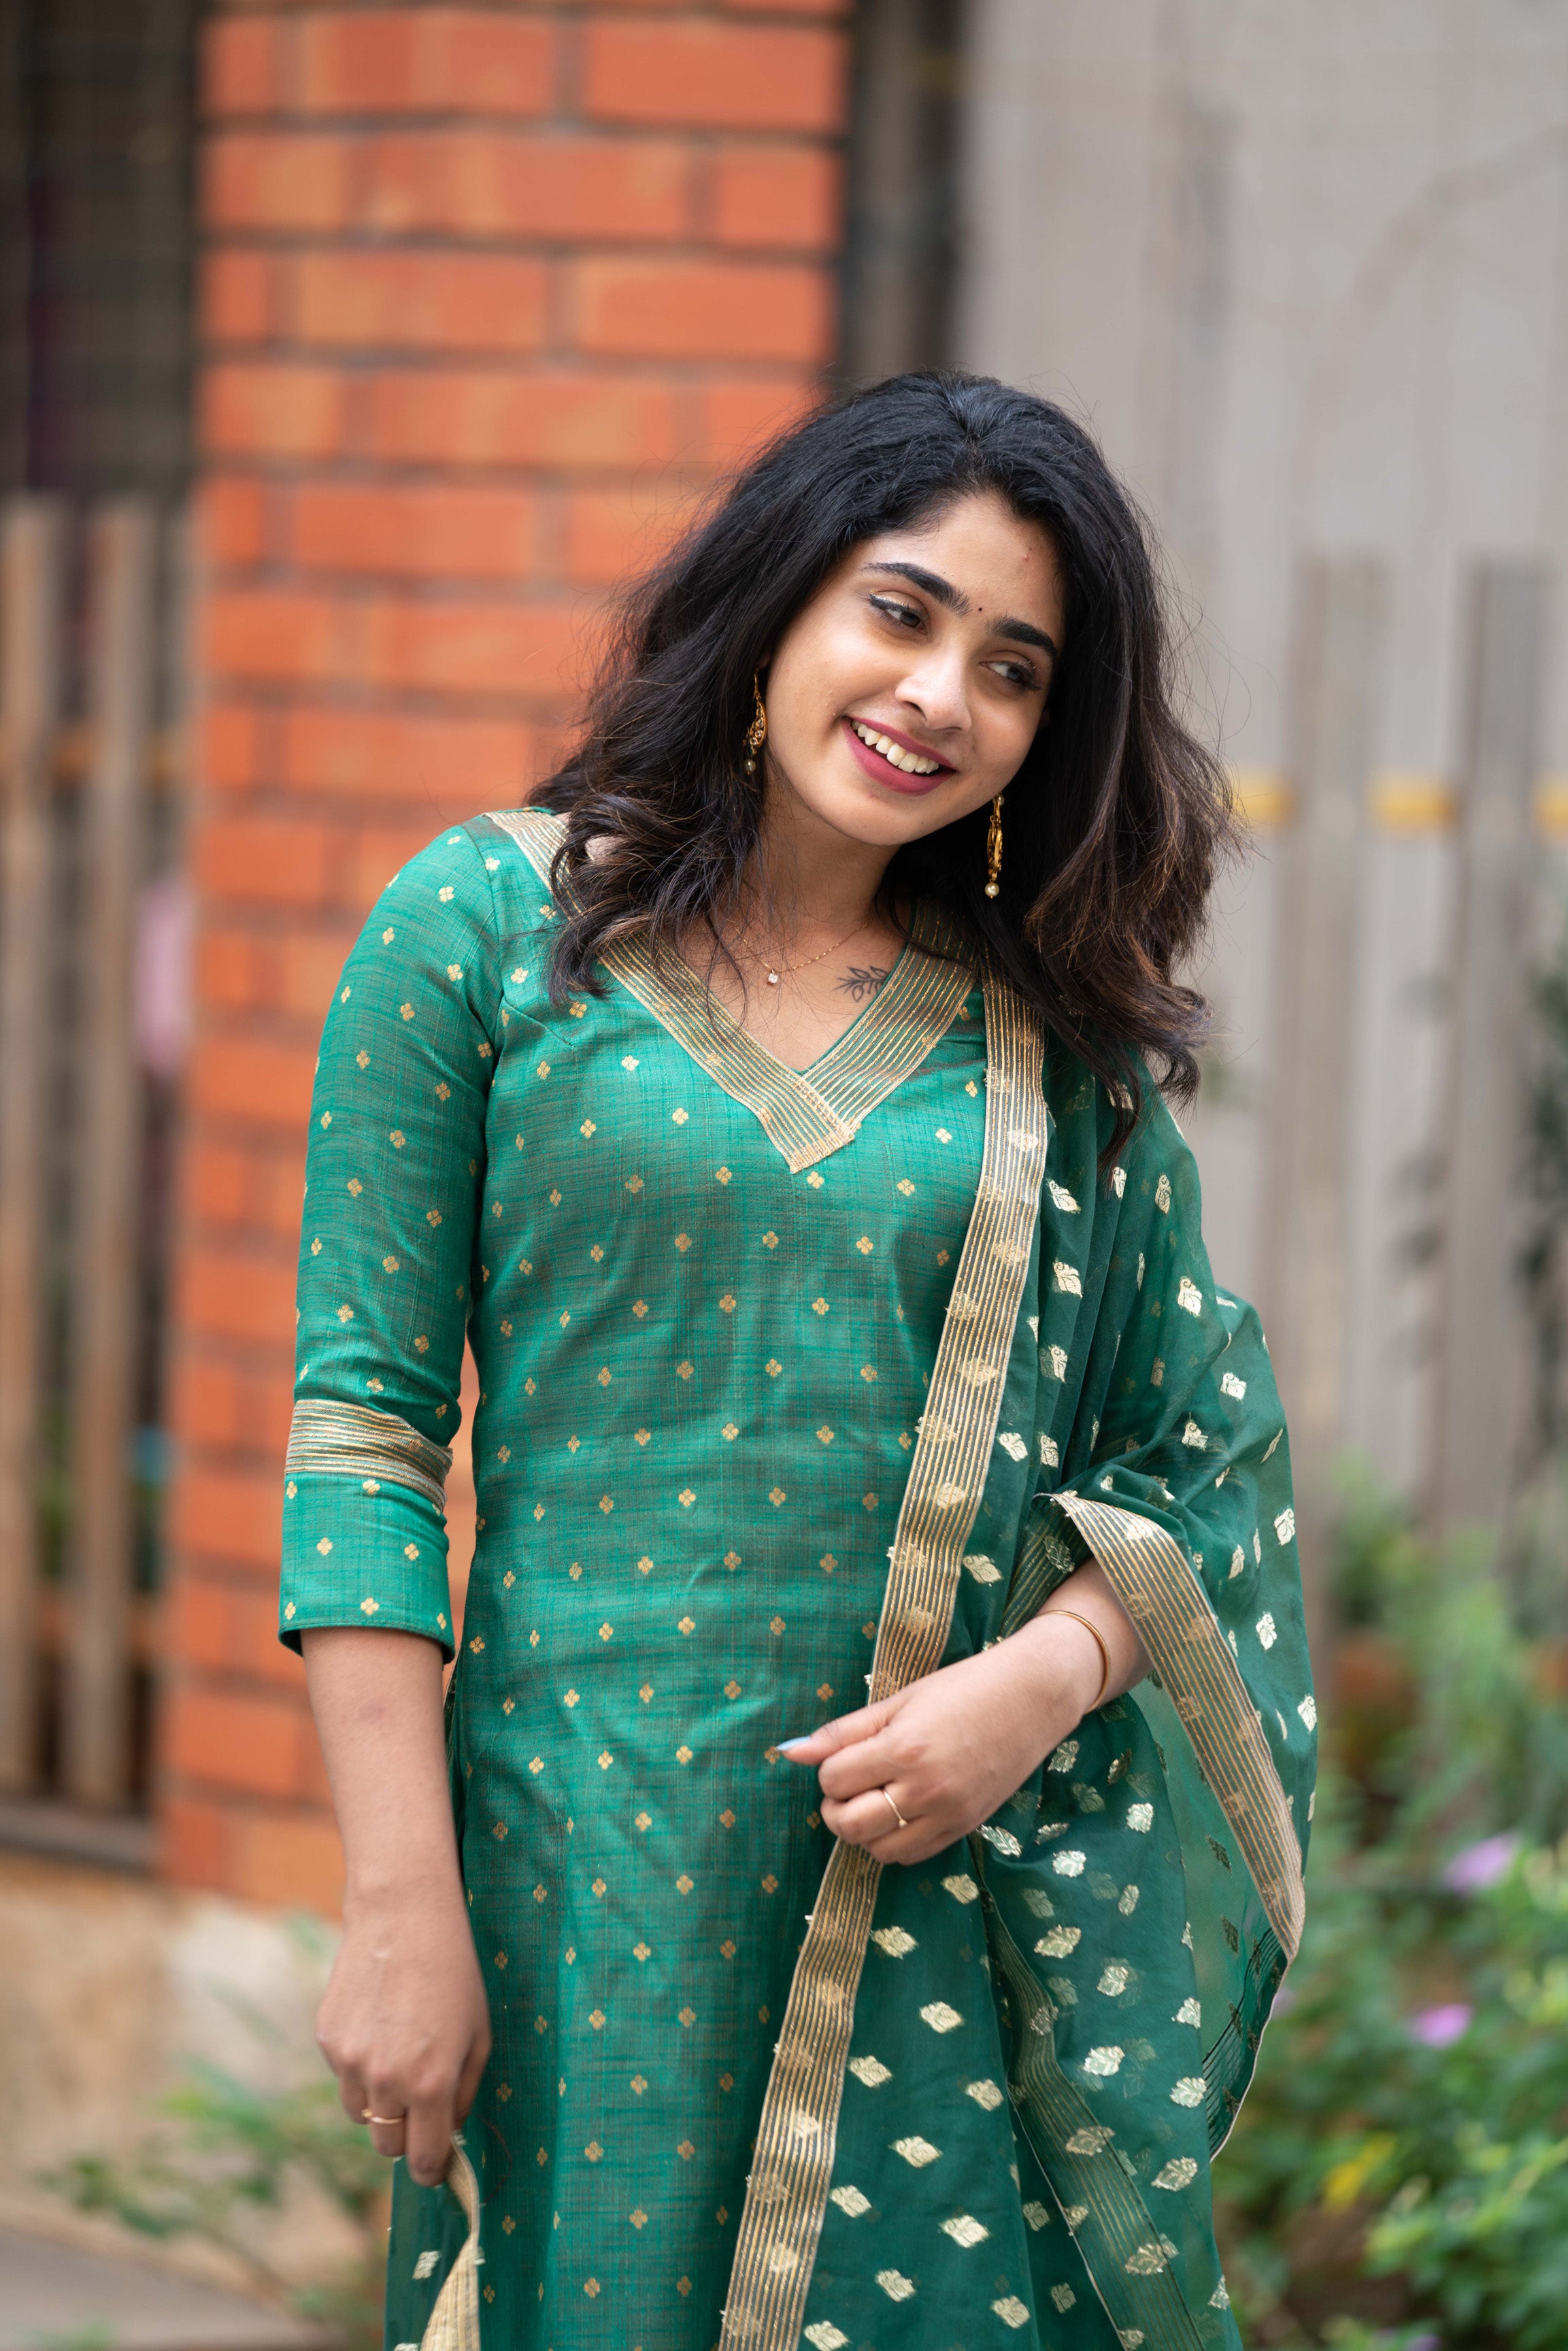 Shop this stylish green kurti for women, deep v neck straight kurti in raw silk with zari embroidery and lace detailing. Comes with a matching organza dupatta.